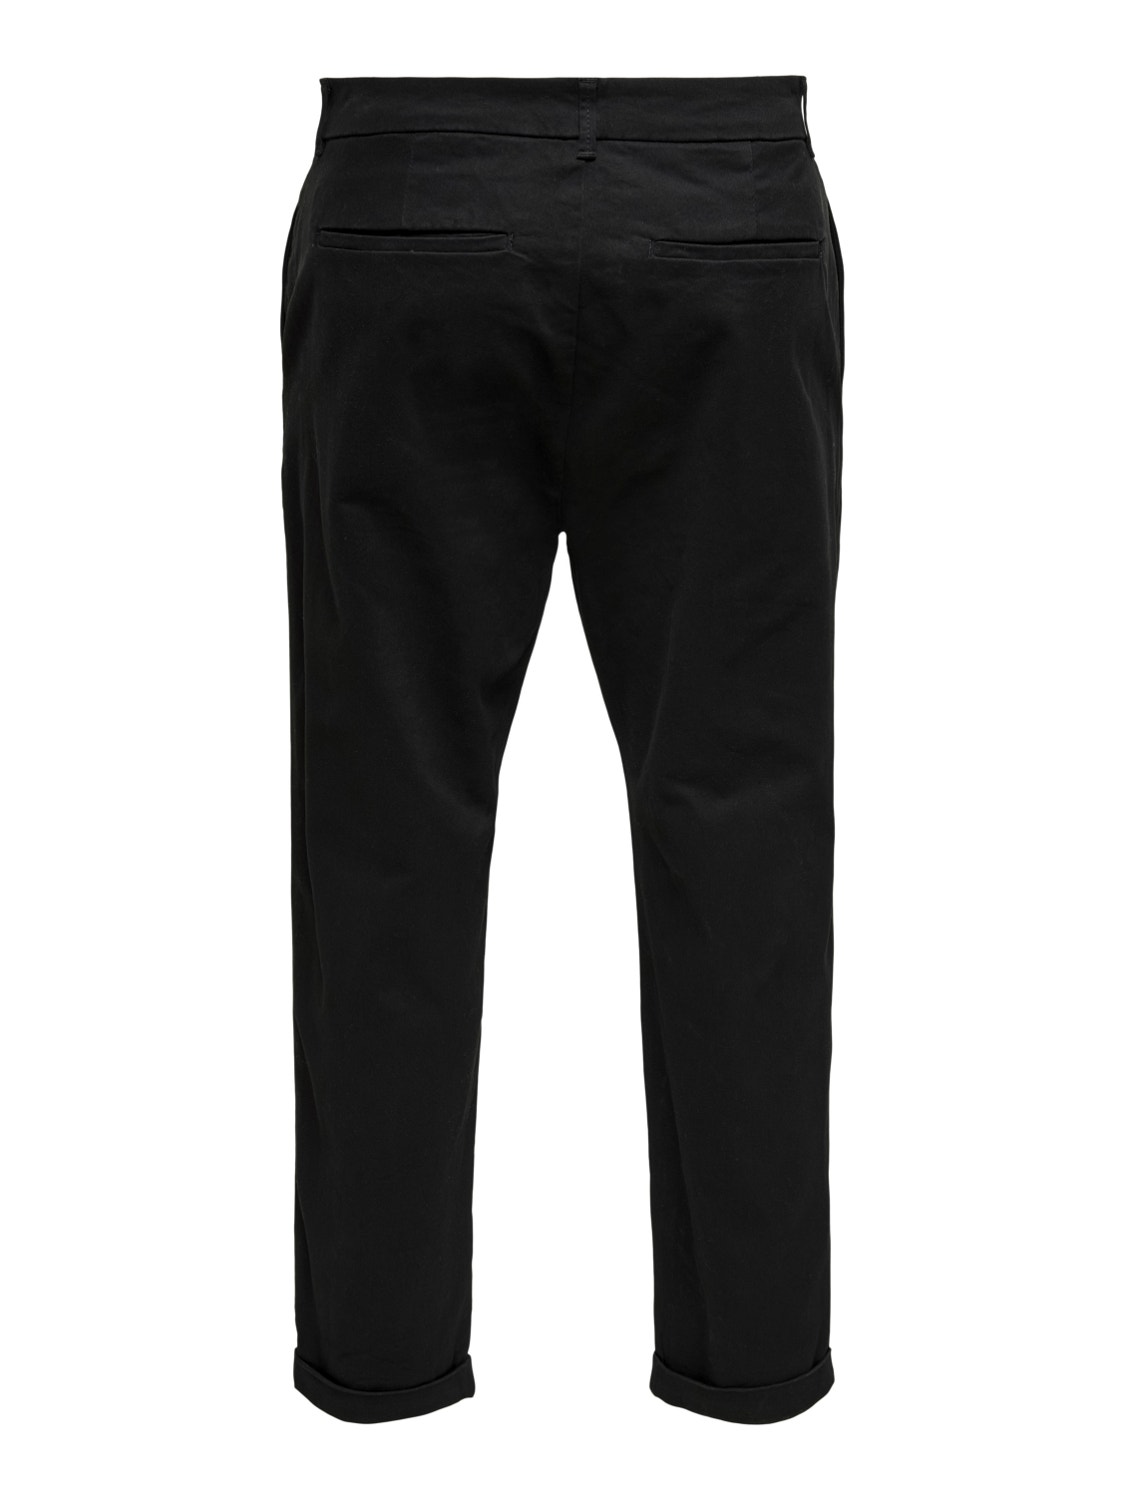 ONLY & SONS Chino pants with turn-up -Black - 22020400